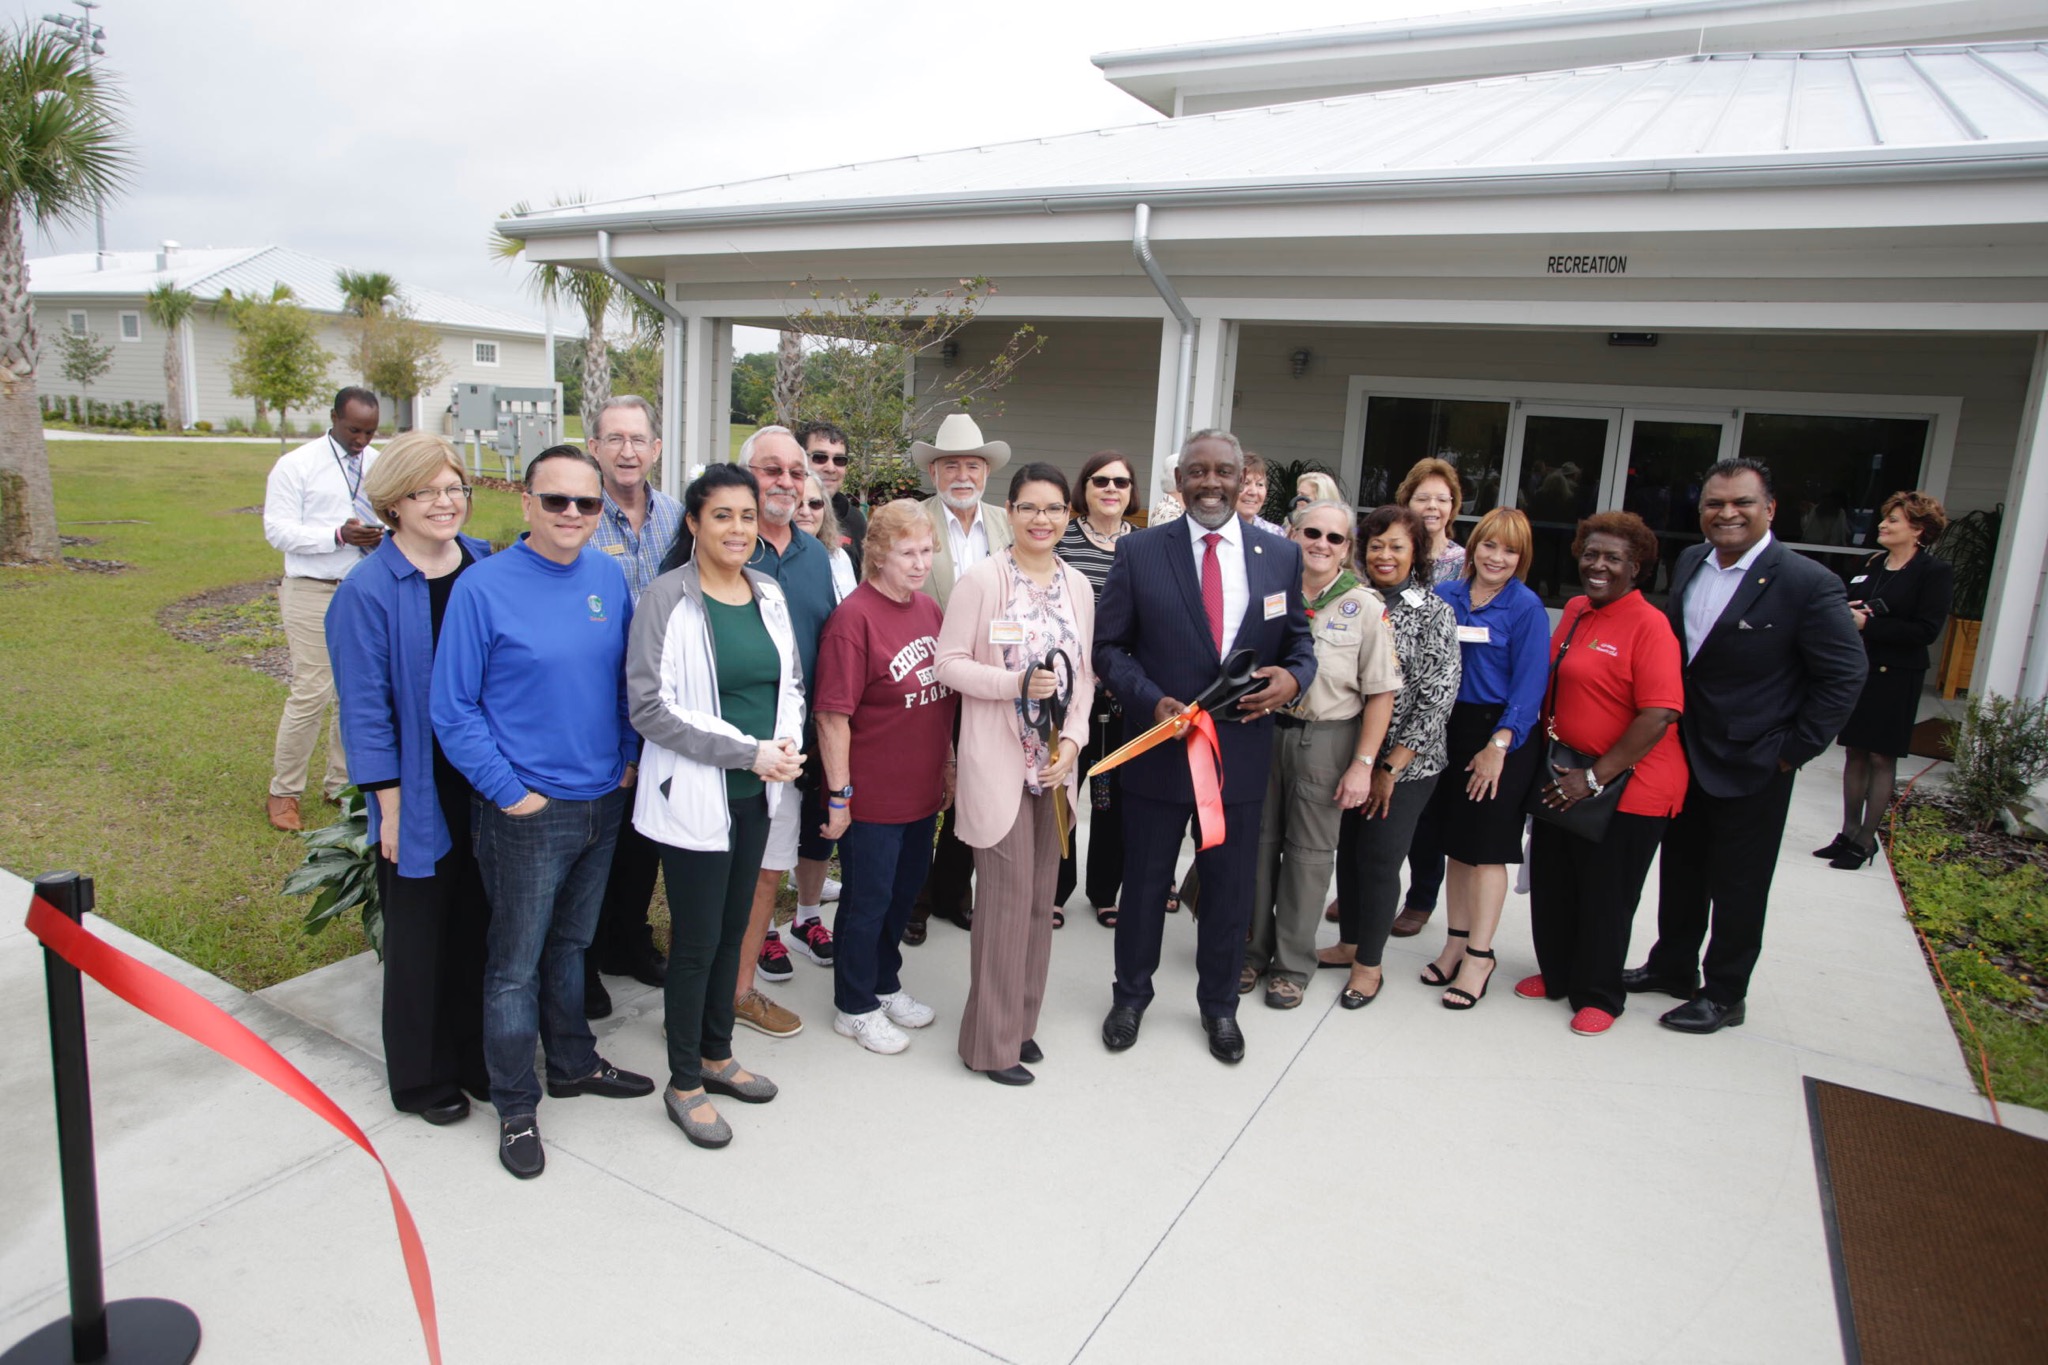 Mayor Demings, Commissioner Bonilla, Commissioner Gomez Cordero are joined by a dozen other individuals. They are standing for a photo and the Mayor is holding large scissors which he used to cut a ribbon.